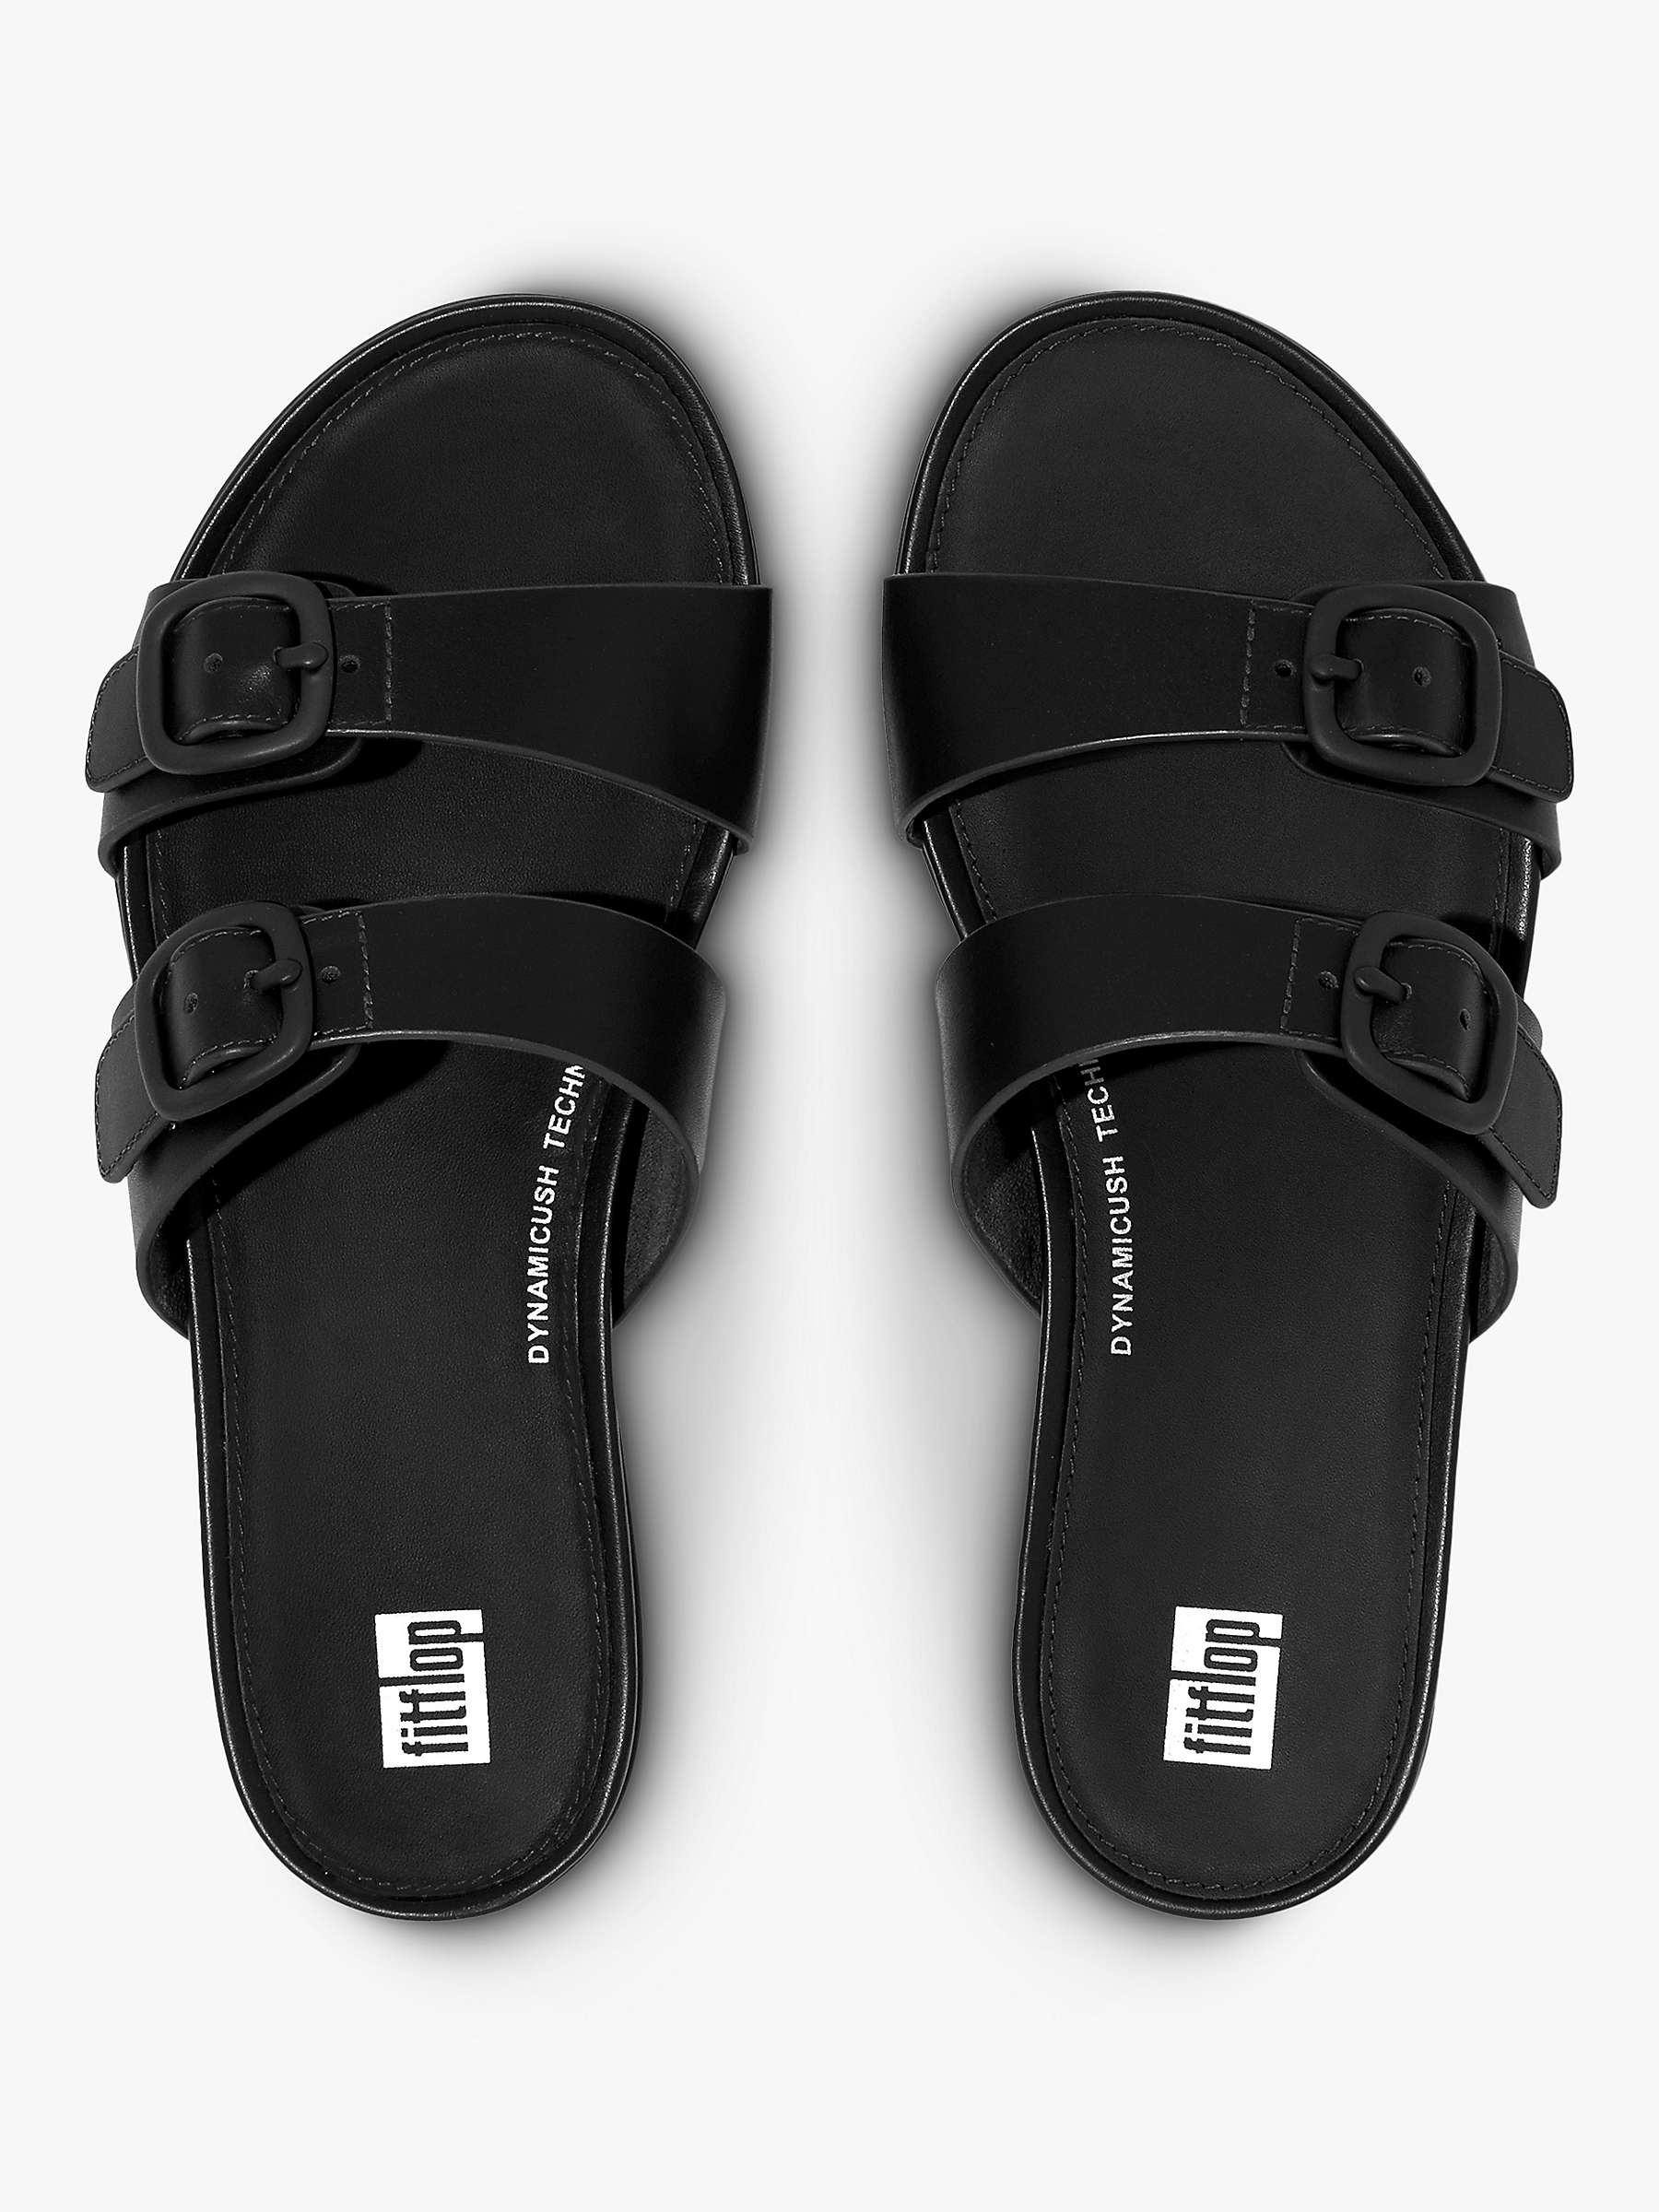 FitFlop Gracie Leather Two Strap Slider Sandals, Black at John Lewis ...